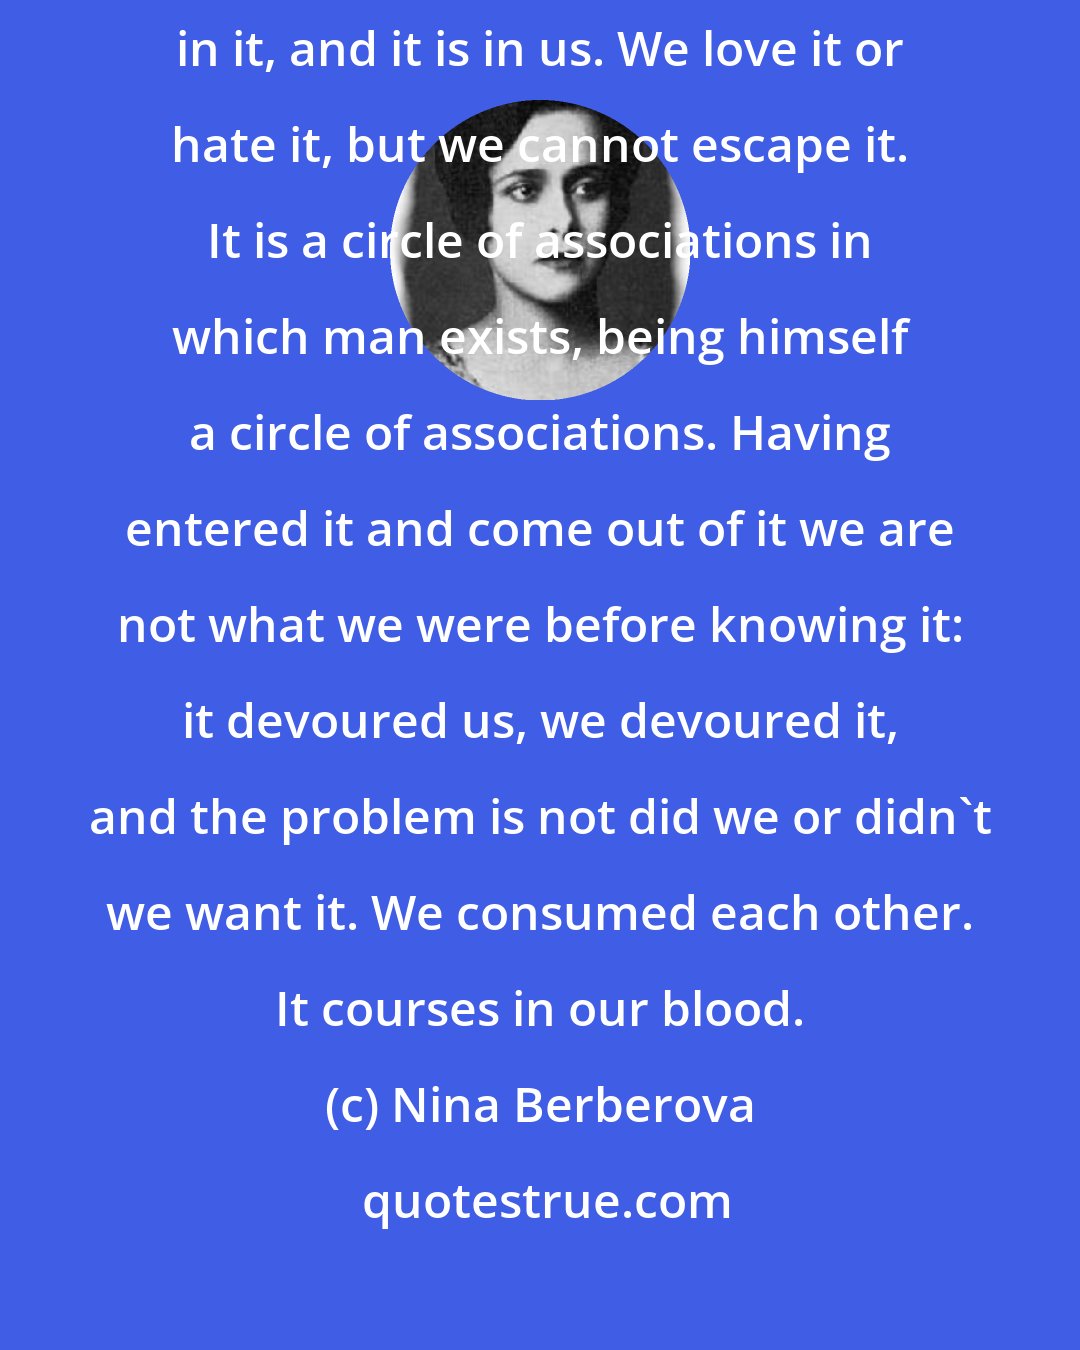 Nina Berberova: [On Paris:] It exists, constant, eternal, surrounding us who live in it, and it is in us. We love it or hate it, but we cannot escape it. It is a circle of associations in which man exists, being himself a circle of associations. Having entered it and come out of it we are not what we were before knowing it: it devoured us, we devoured it, and the problem is not did we or didn't we want it. We consumed each other. It courses in our blood.